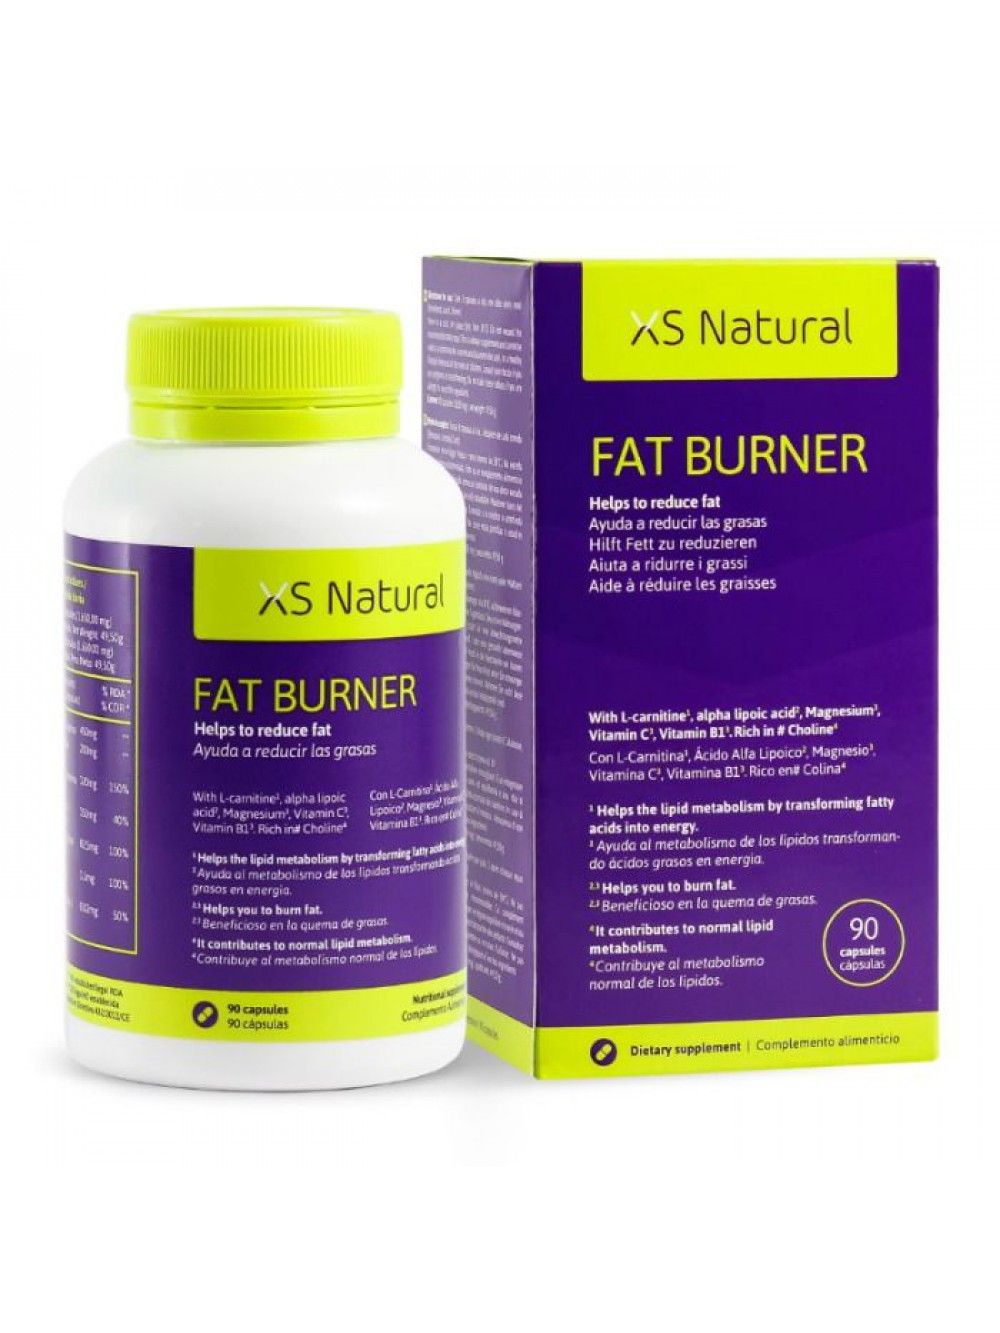 XS NATURAL FAT BURNER FAT BURNING WEIGHT LOST SUPPLEMENT